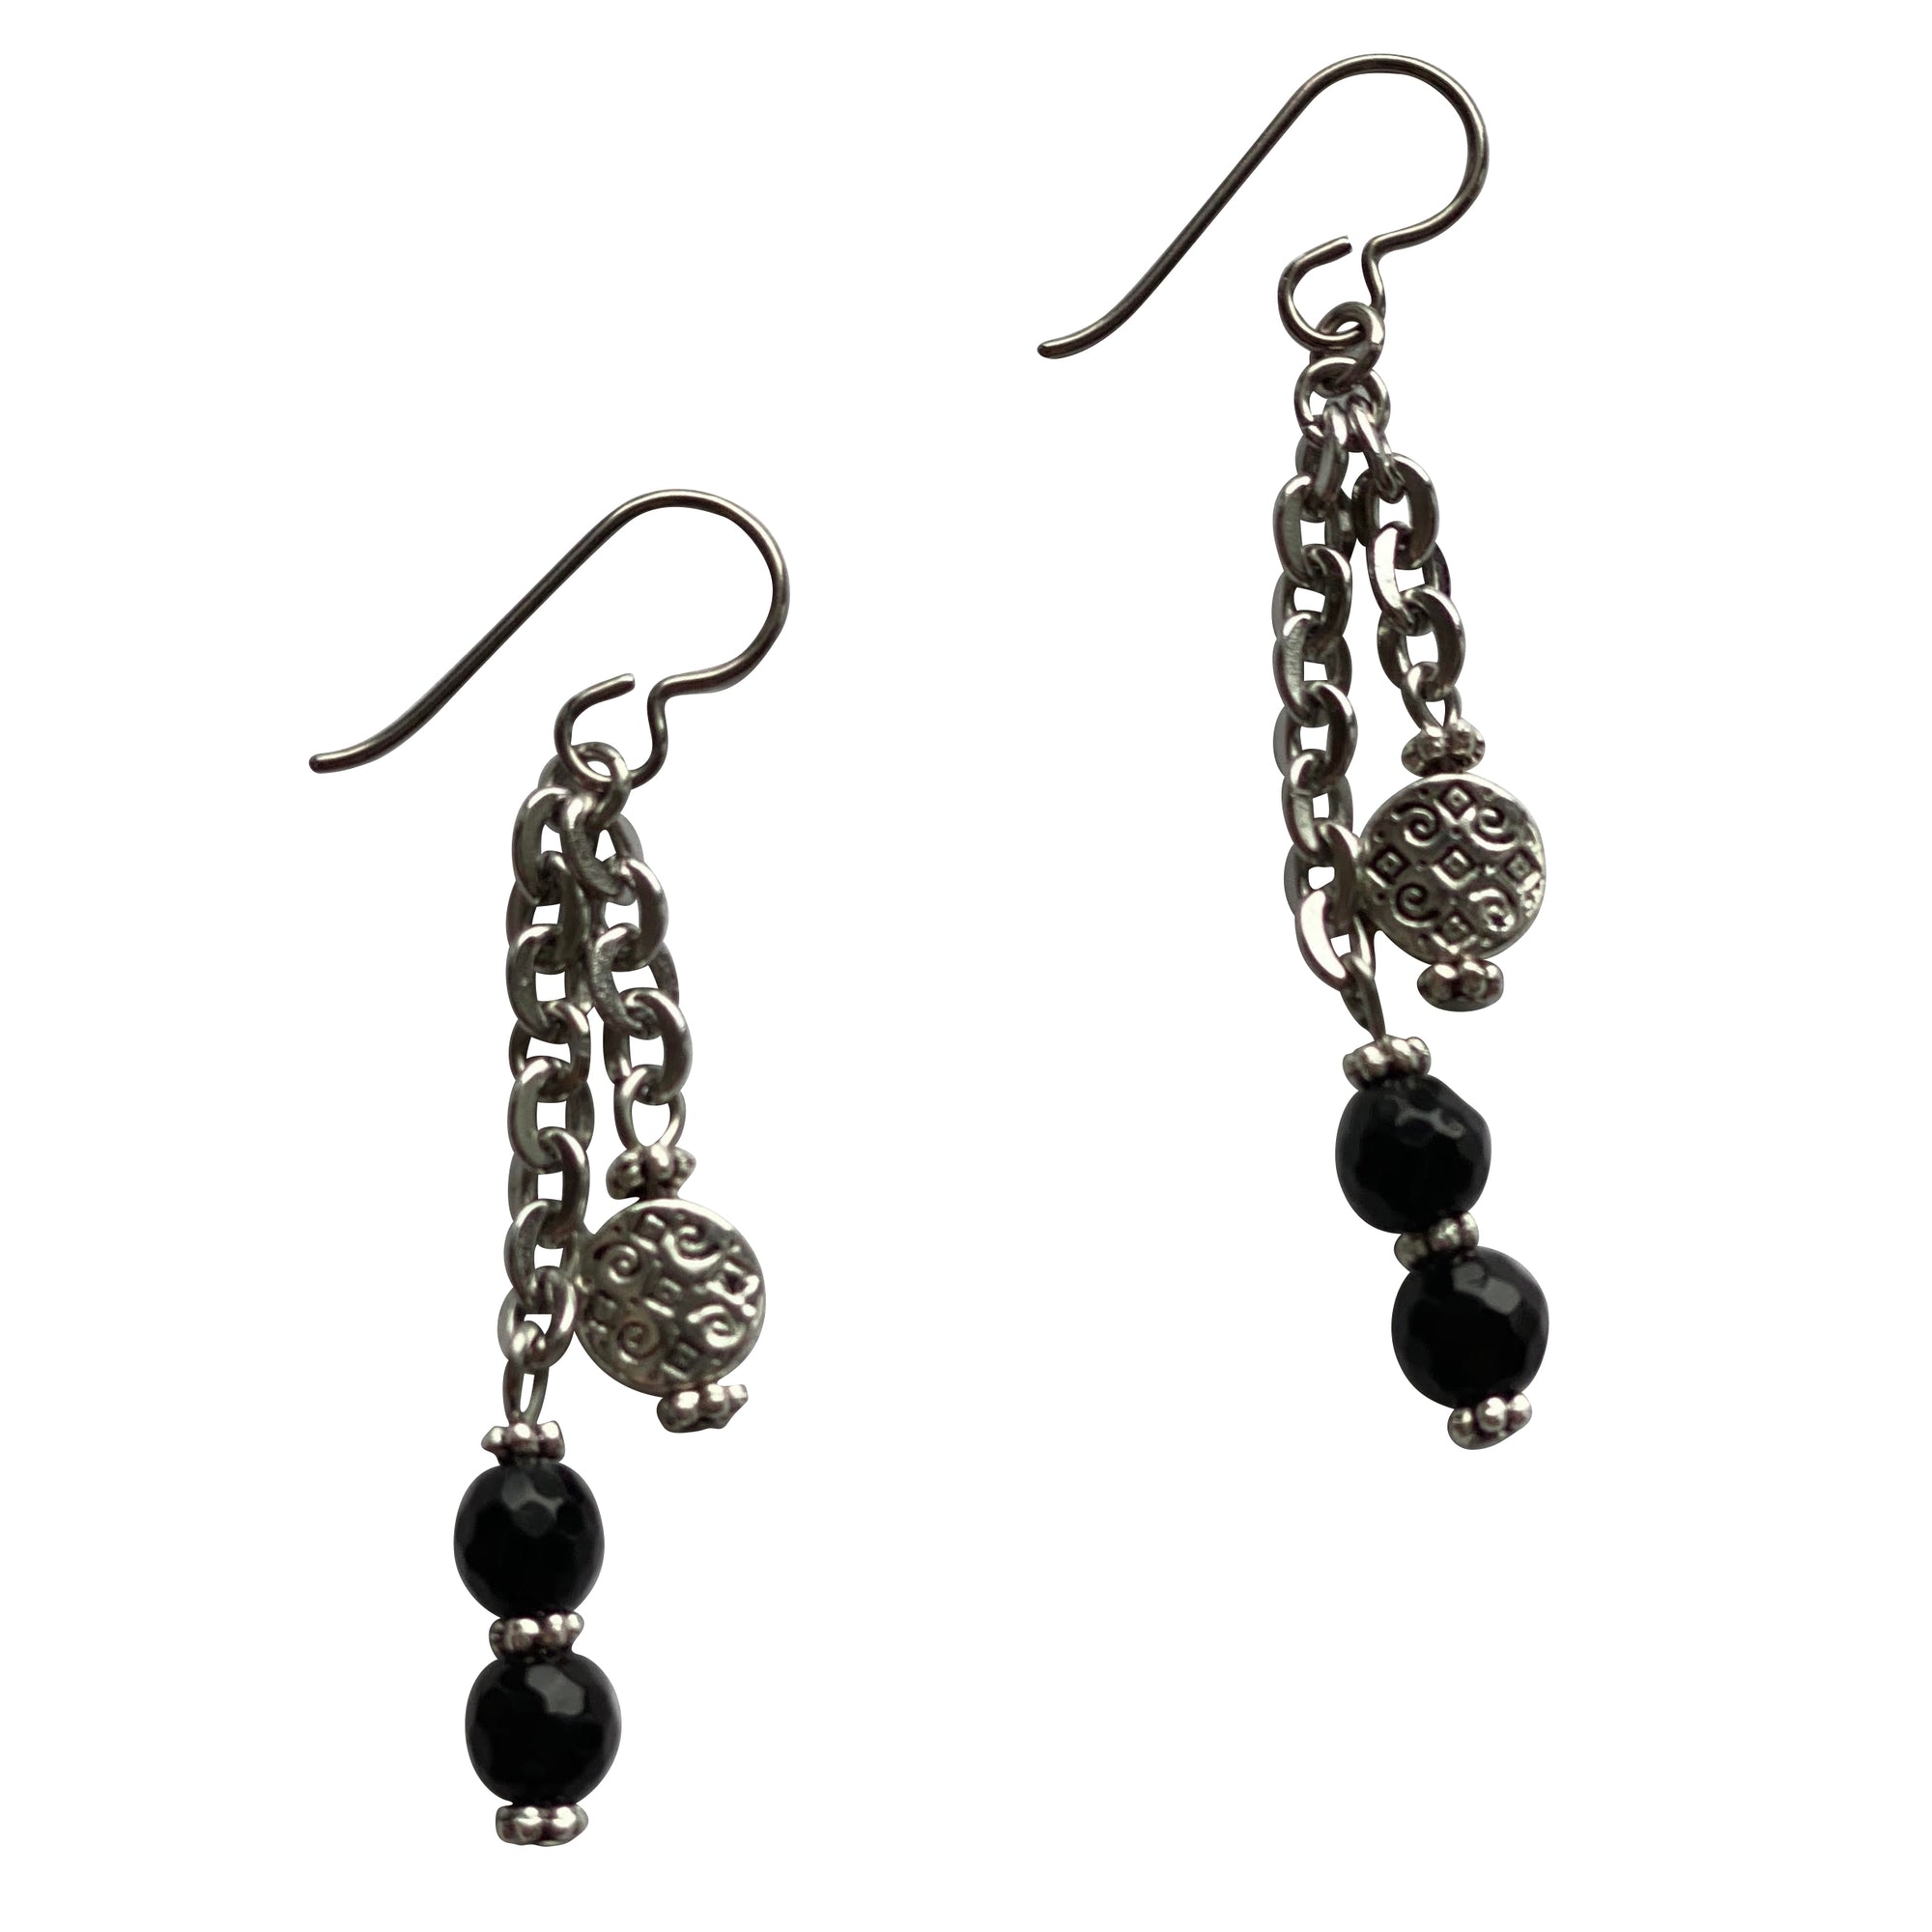 Black Onyx Earrings with Stainless Steel Chain